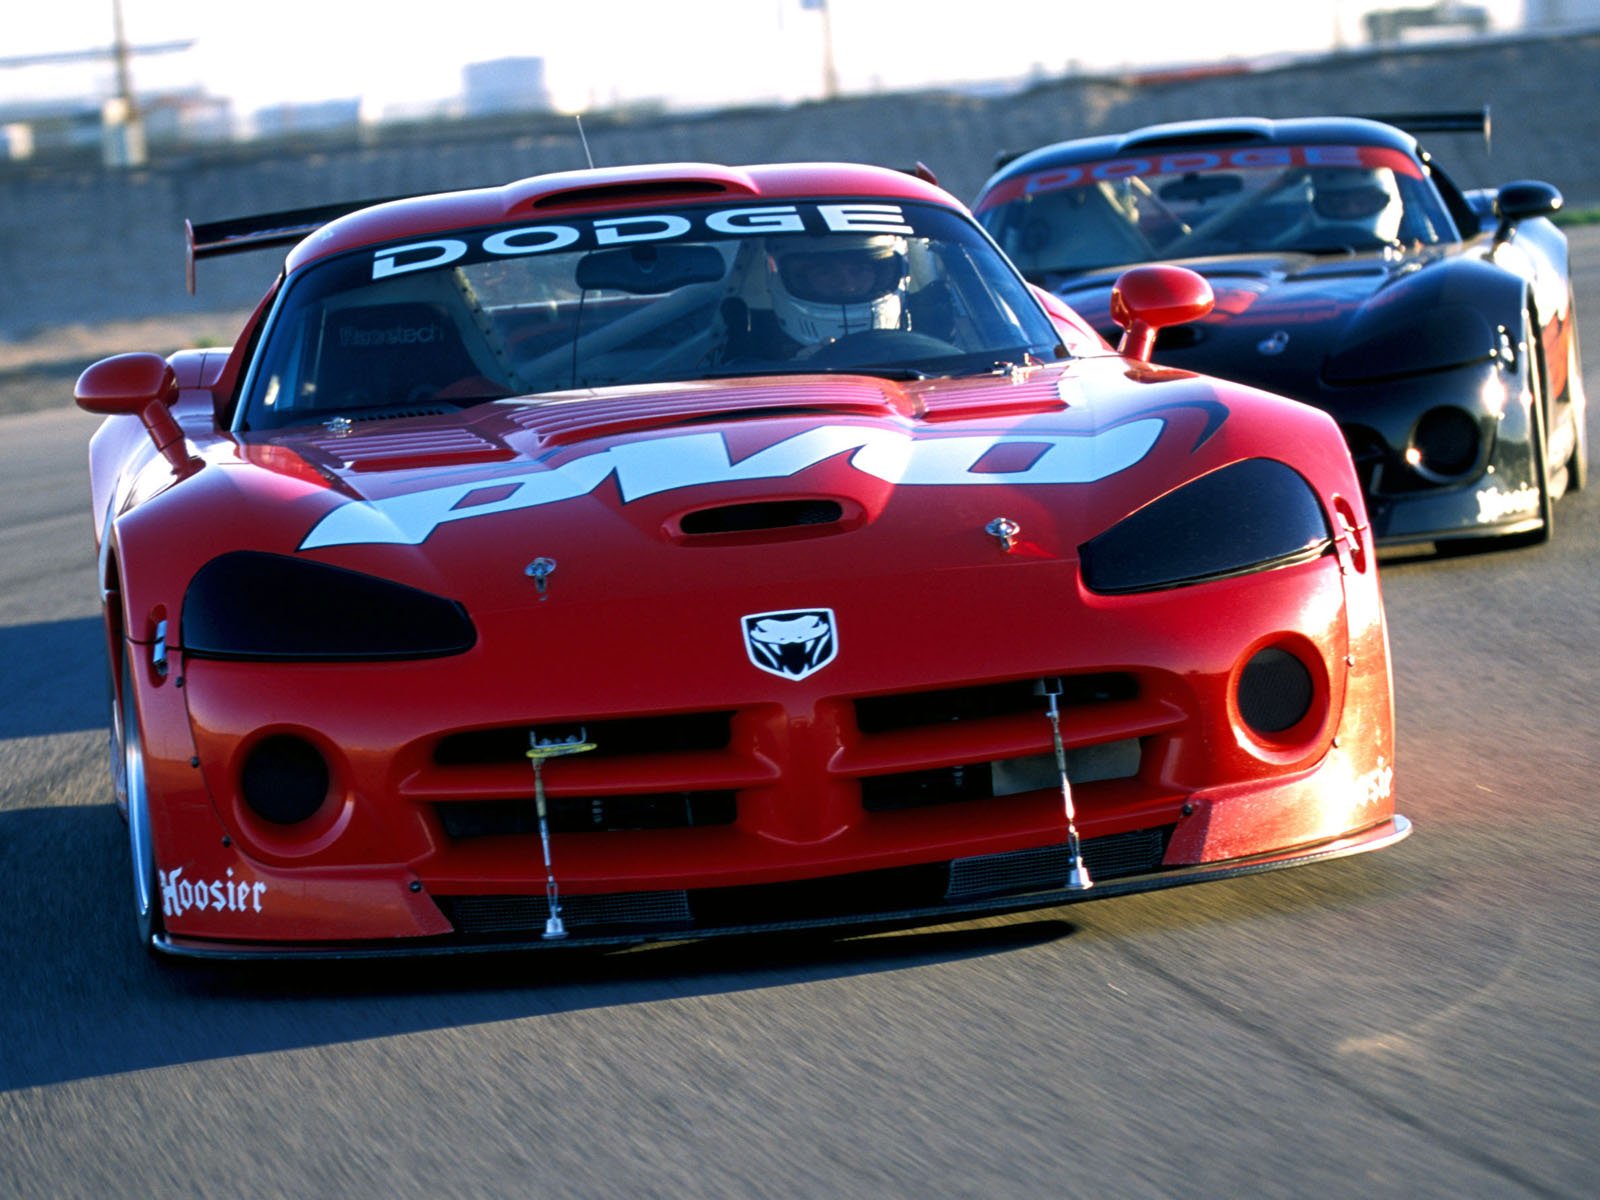 2003, Dodge, Viper, Competition, Coupe, Supercar, Supercars, Muscle, Race, Racing Wallpaper